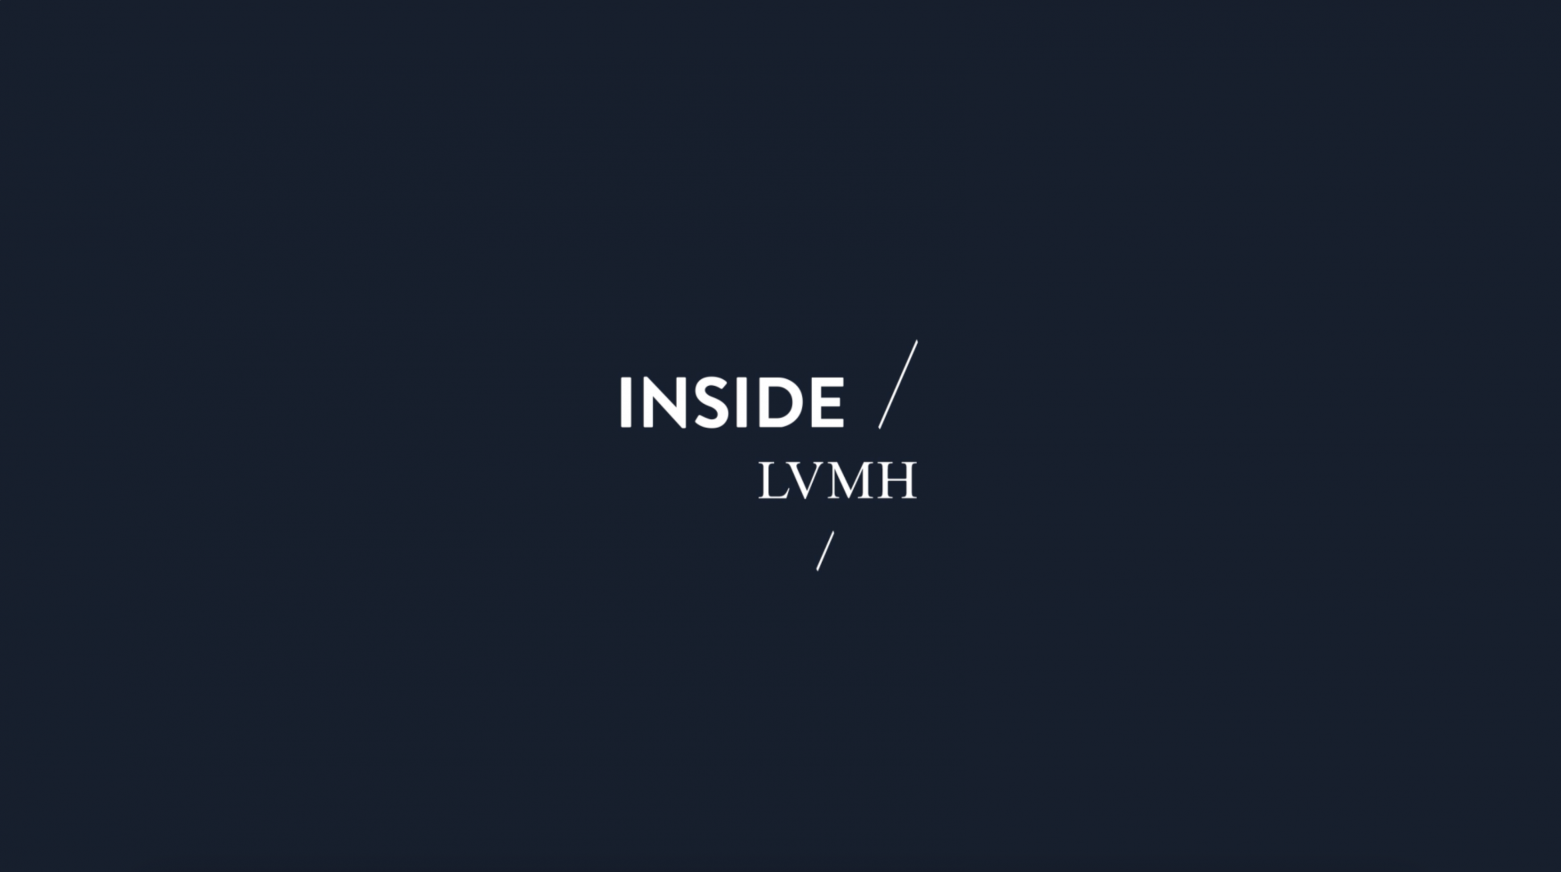 LVMH—The Inside LVMH certificate. Free of Charge! Only 3 days left! Go to  get it!! 